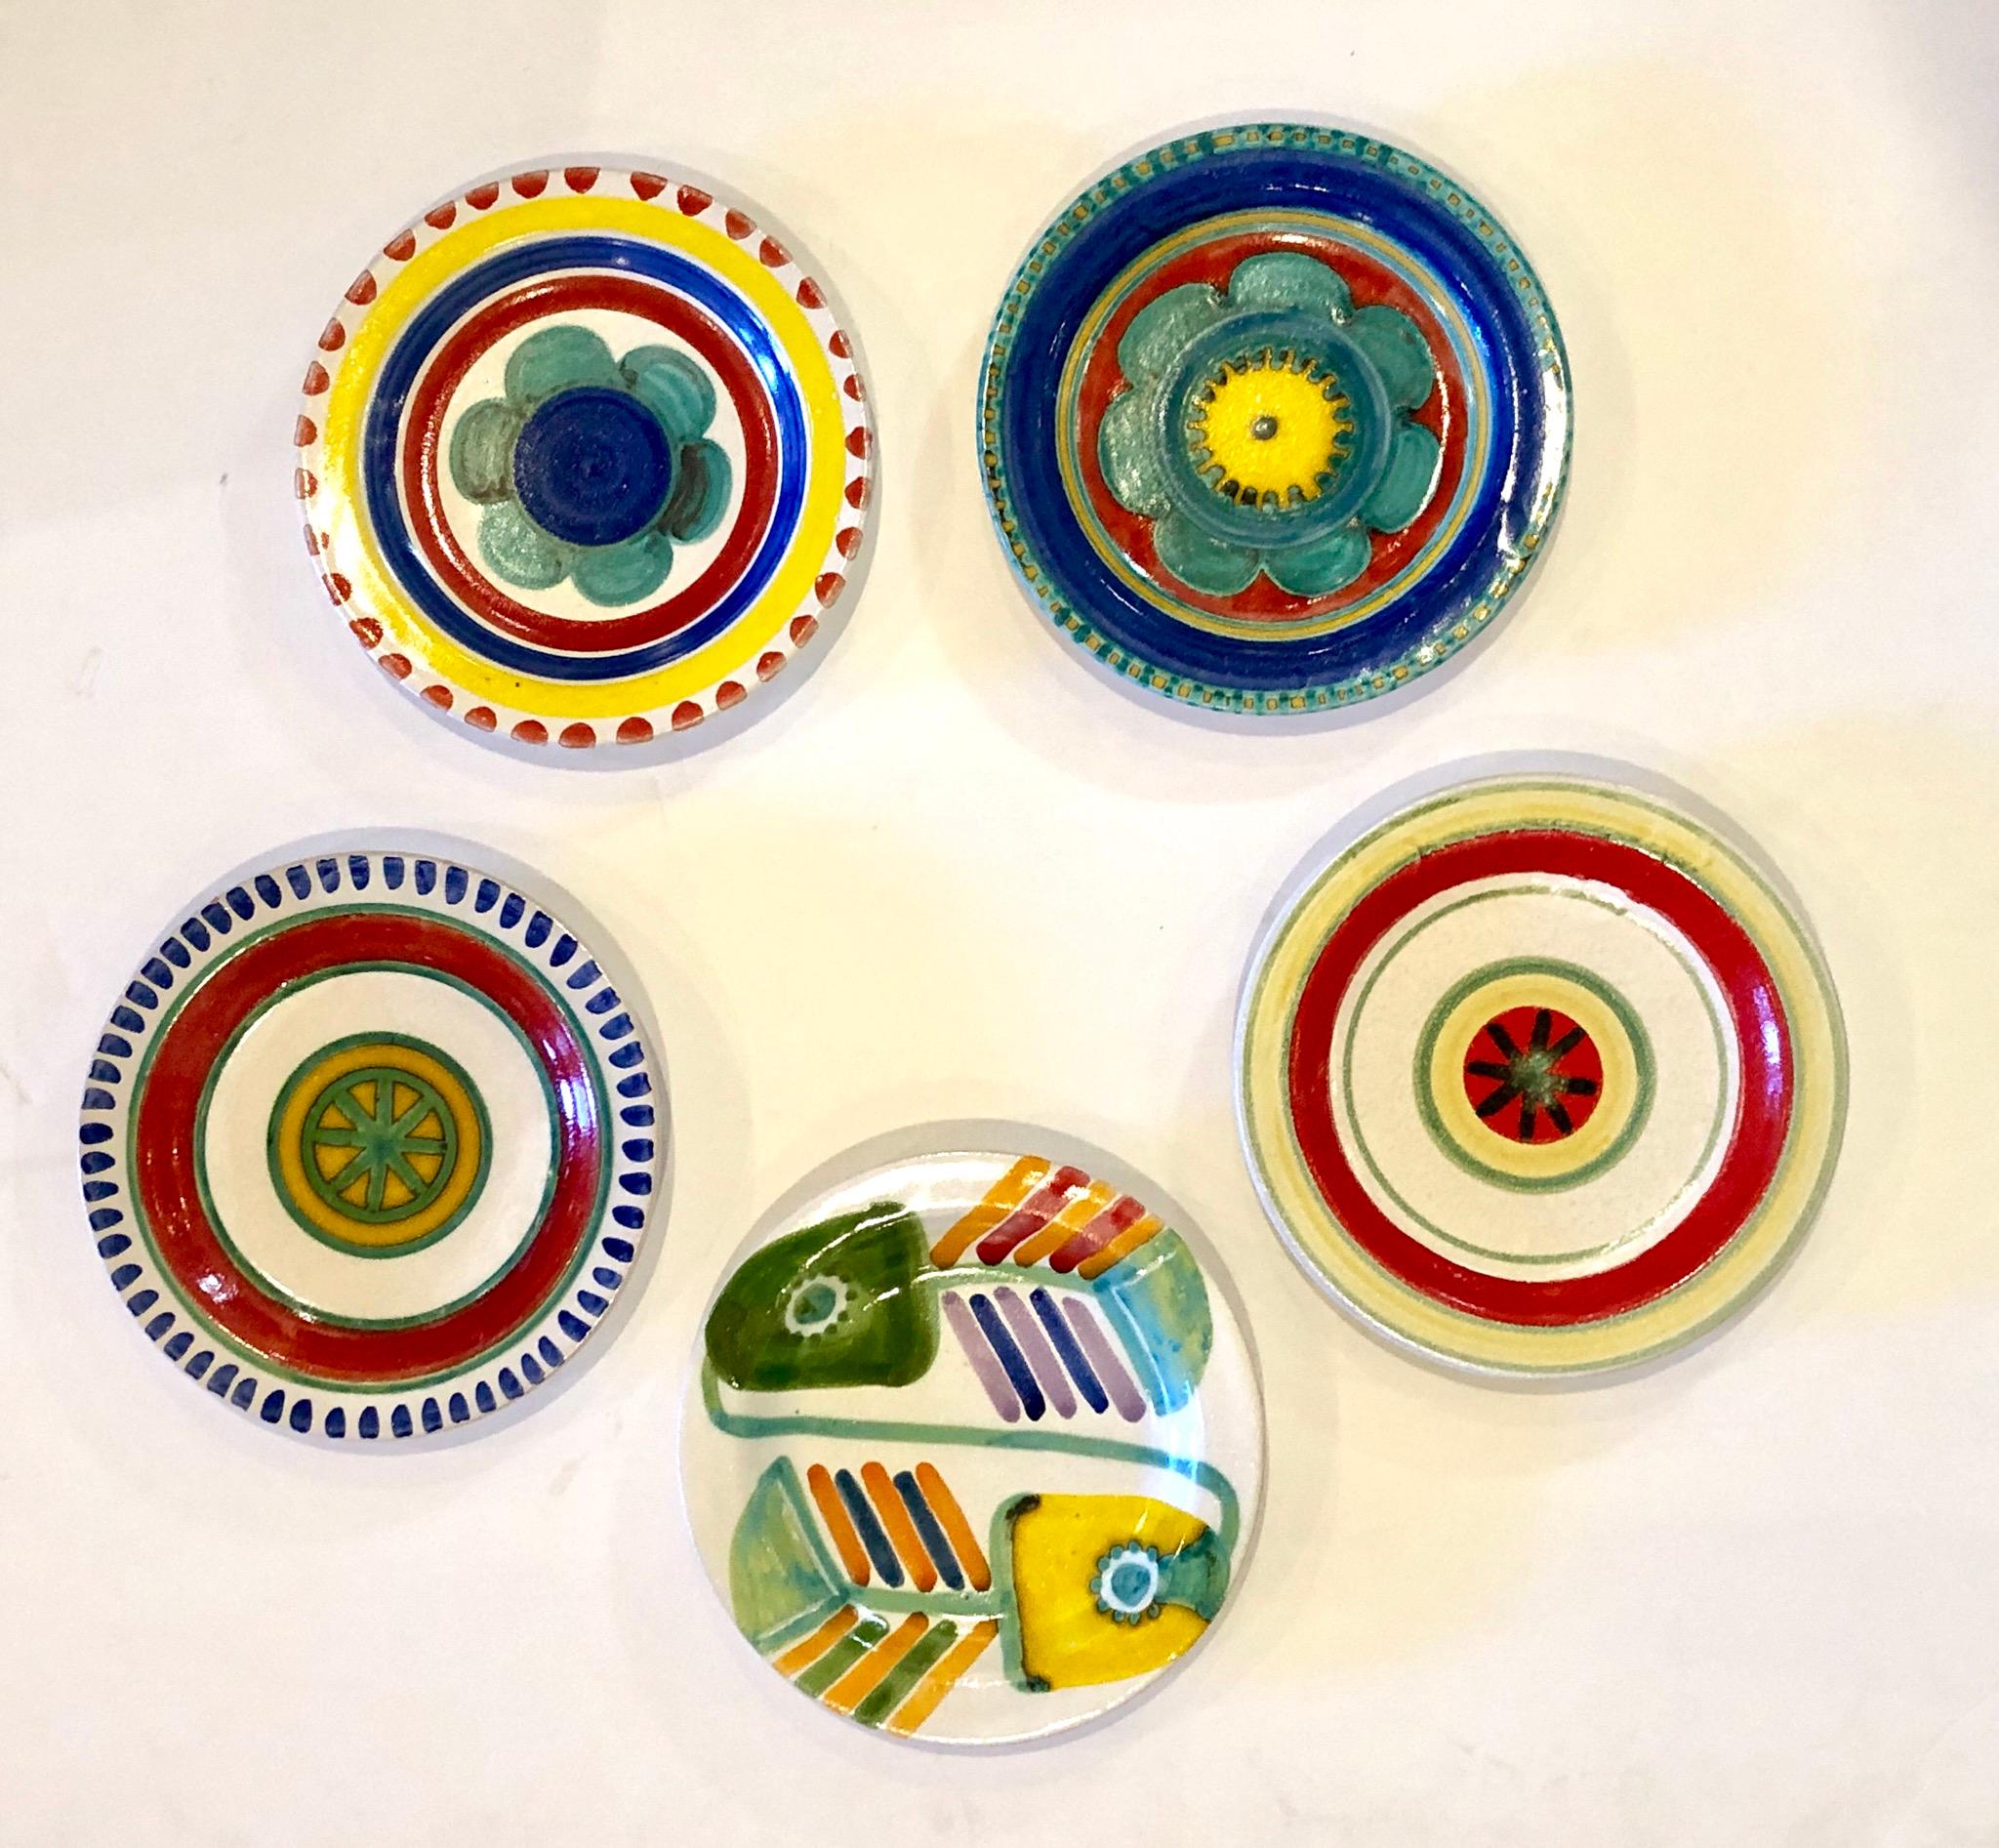 Beautiful design and collection set on these 5 ceramic plates, highly collectible plate by DeSimone, circa 1960s, made in Italy, great condition no chips or cracks very light wear. Signed and numbered.